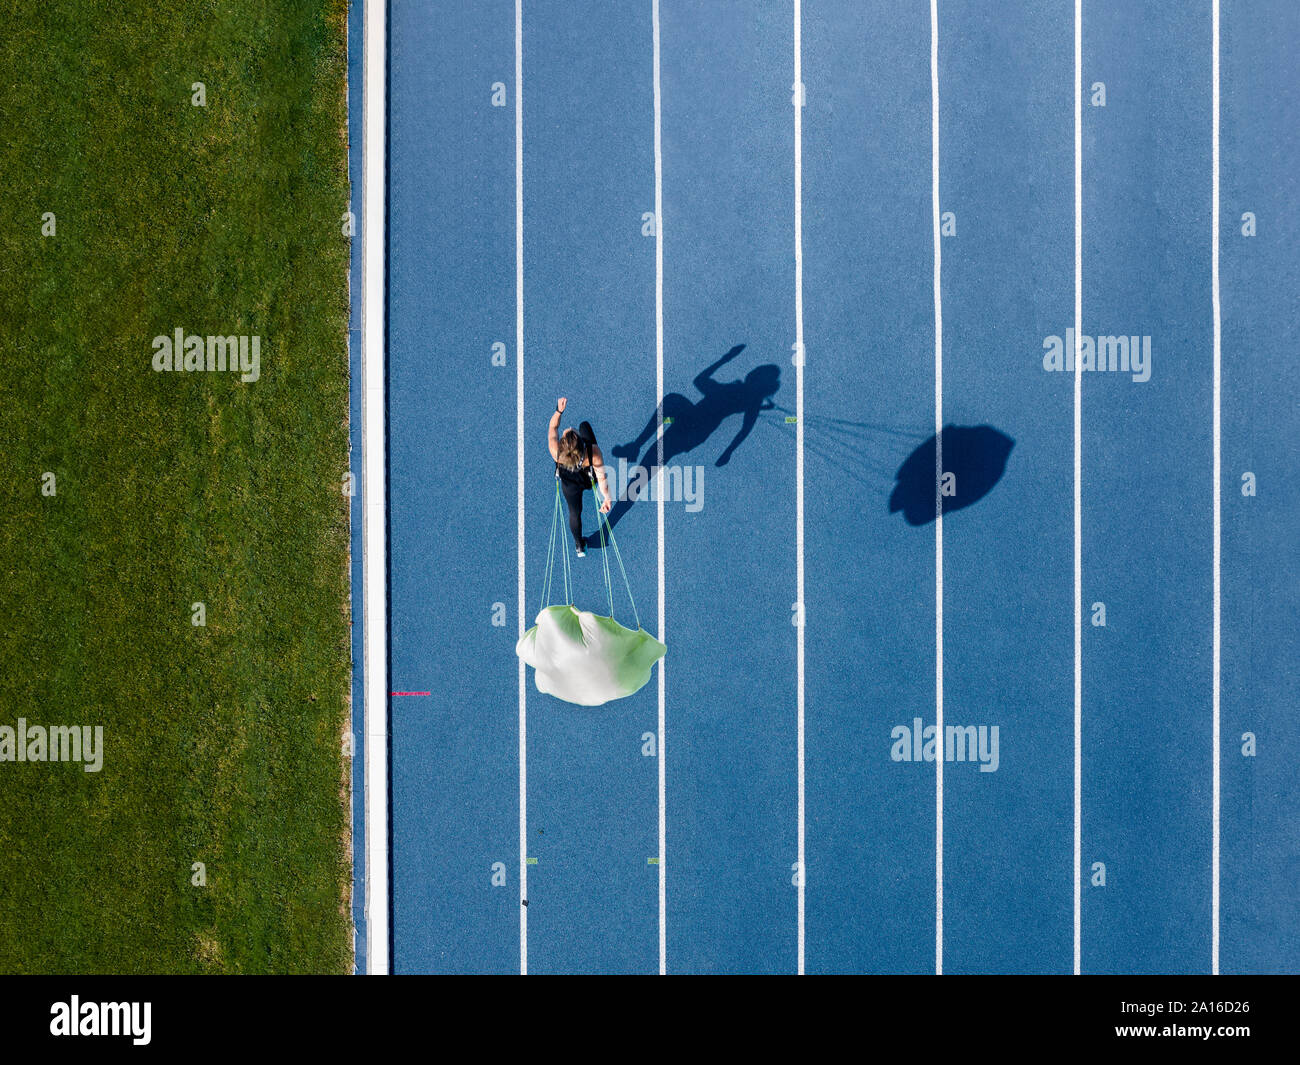 Top view of female runner with parachute on tartan track Stock Photo